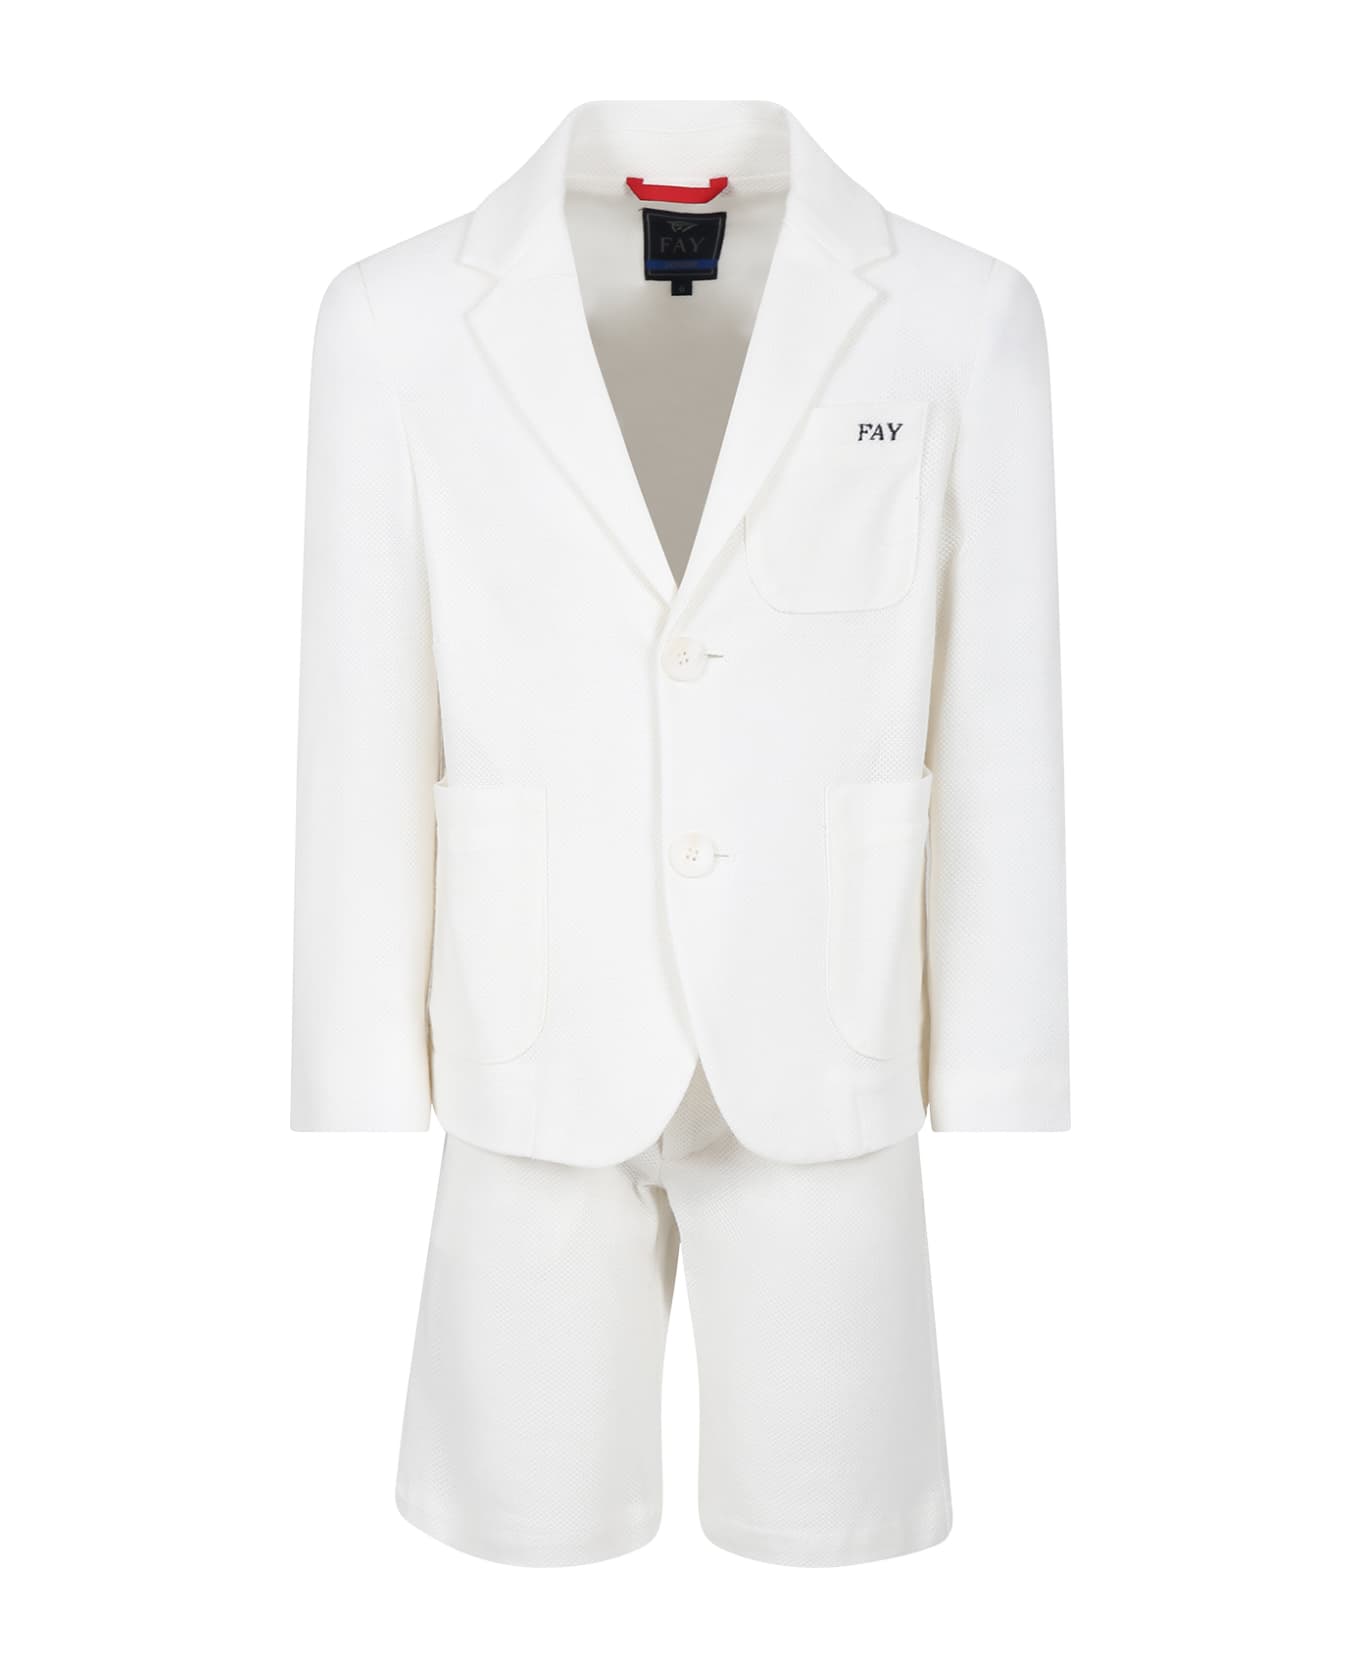 Fay Ivory Suit For Boy With Logo - Ivory